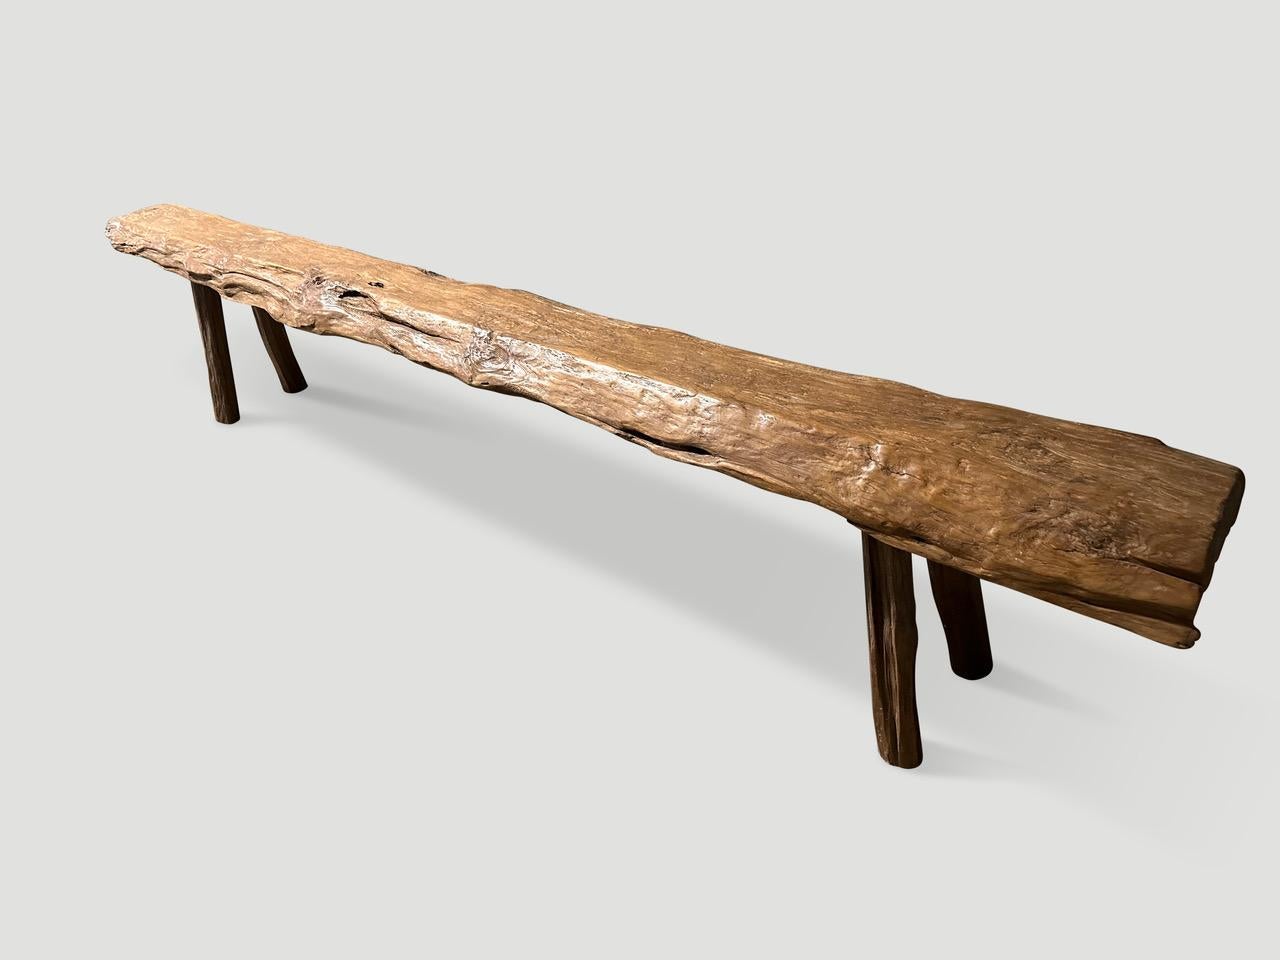 Andrianna Shamaris Antique Teak Wood Log Bench In Excellent Condition For Sale In New York, NY